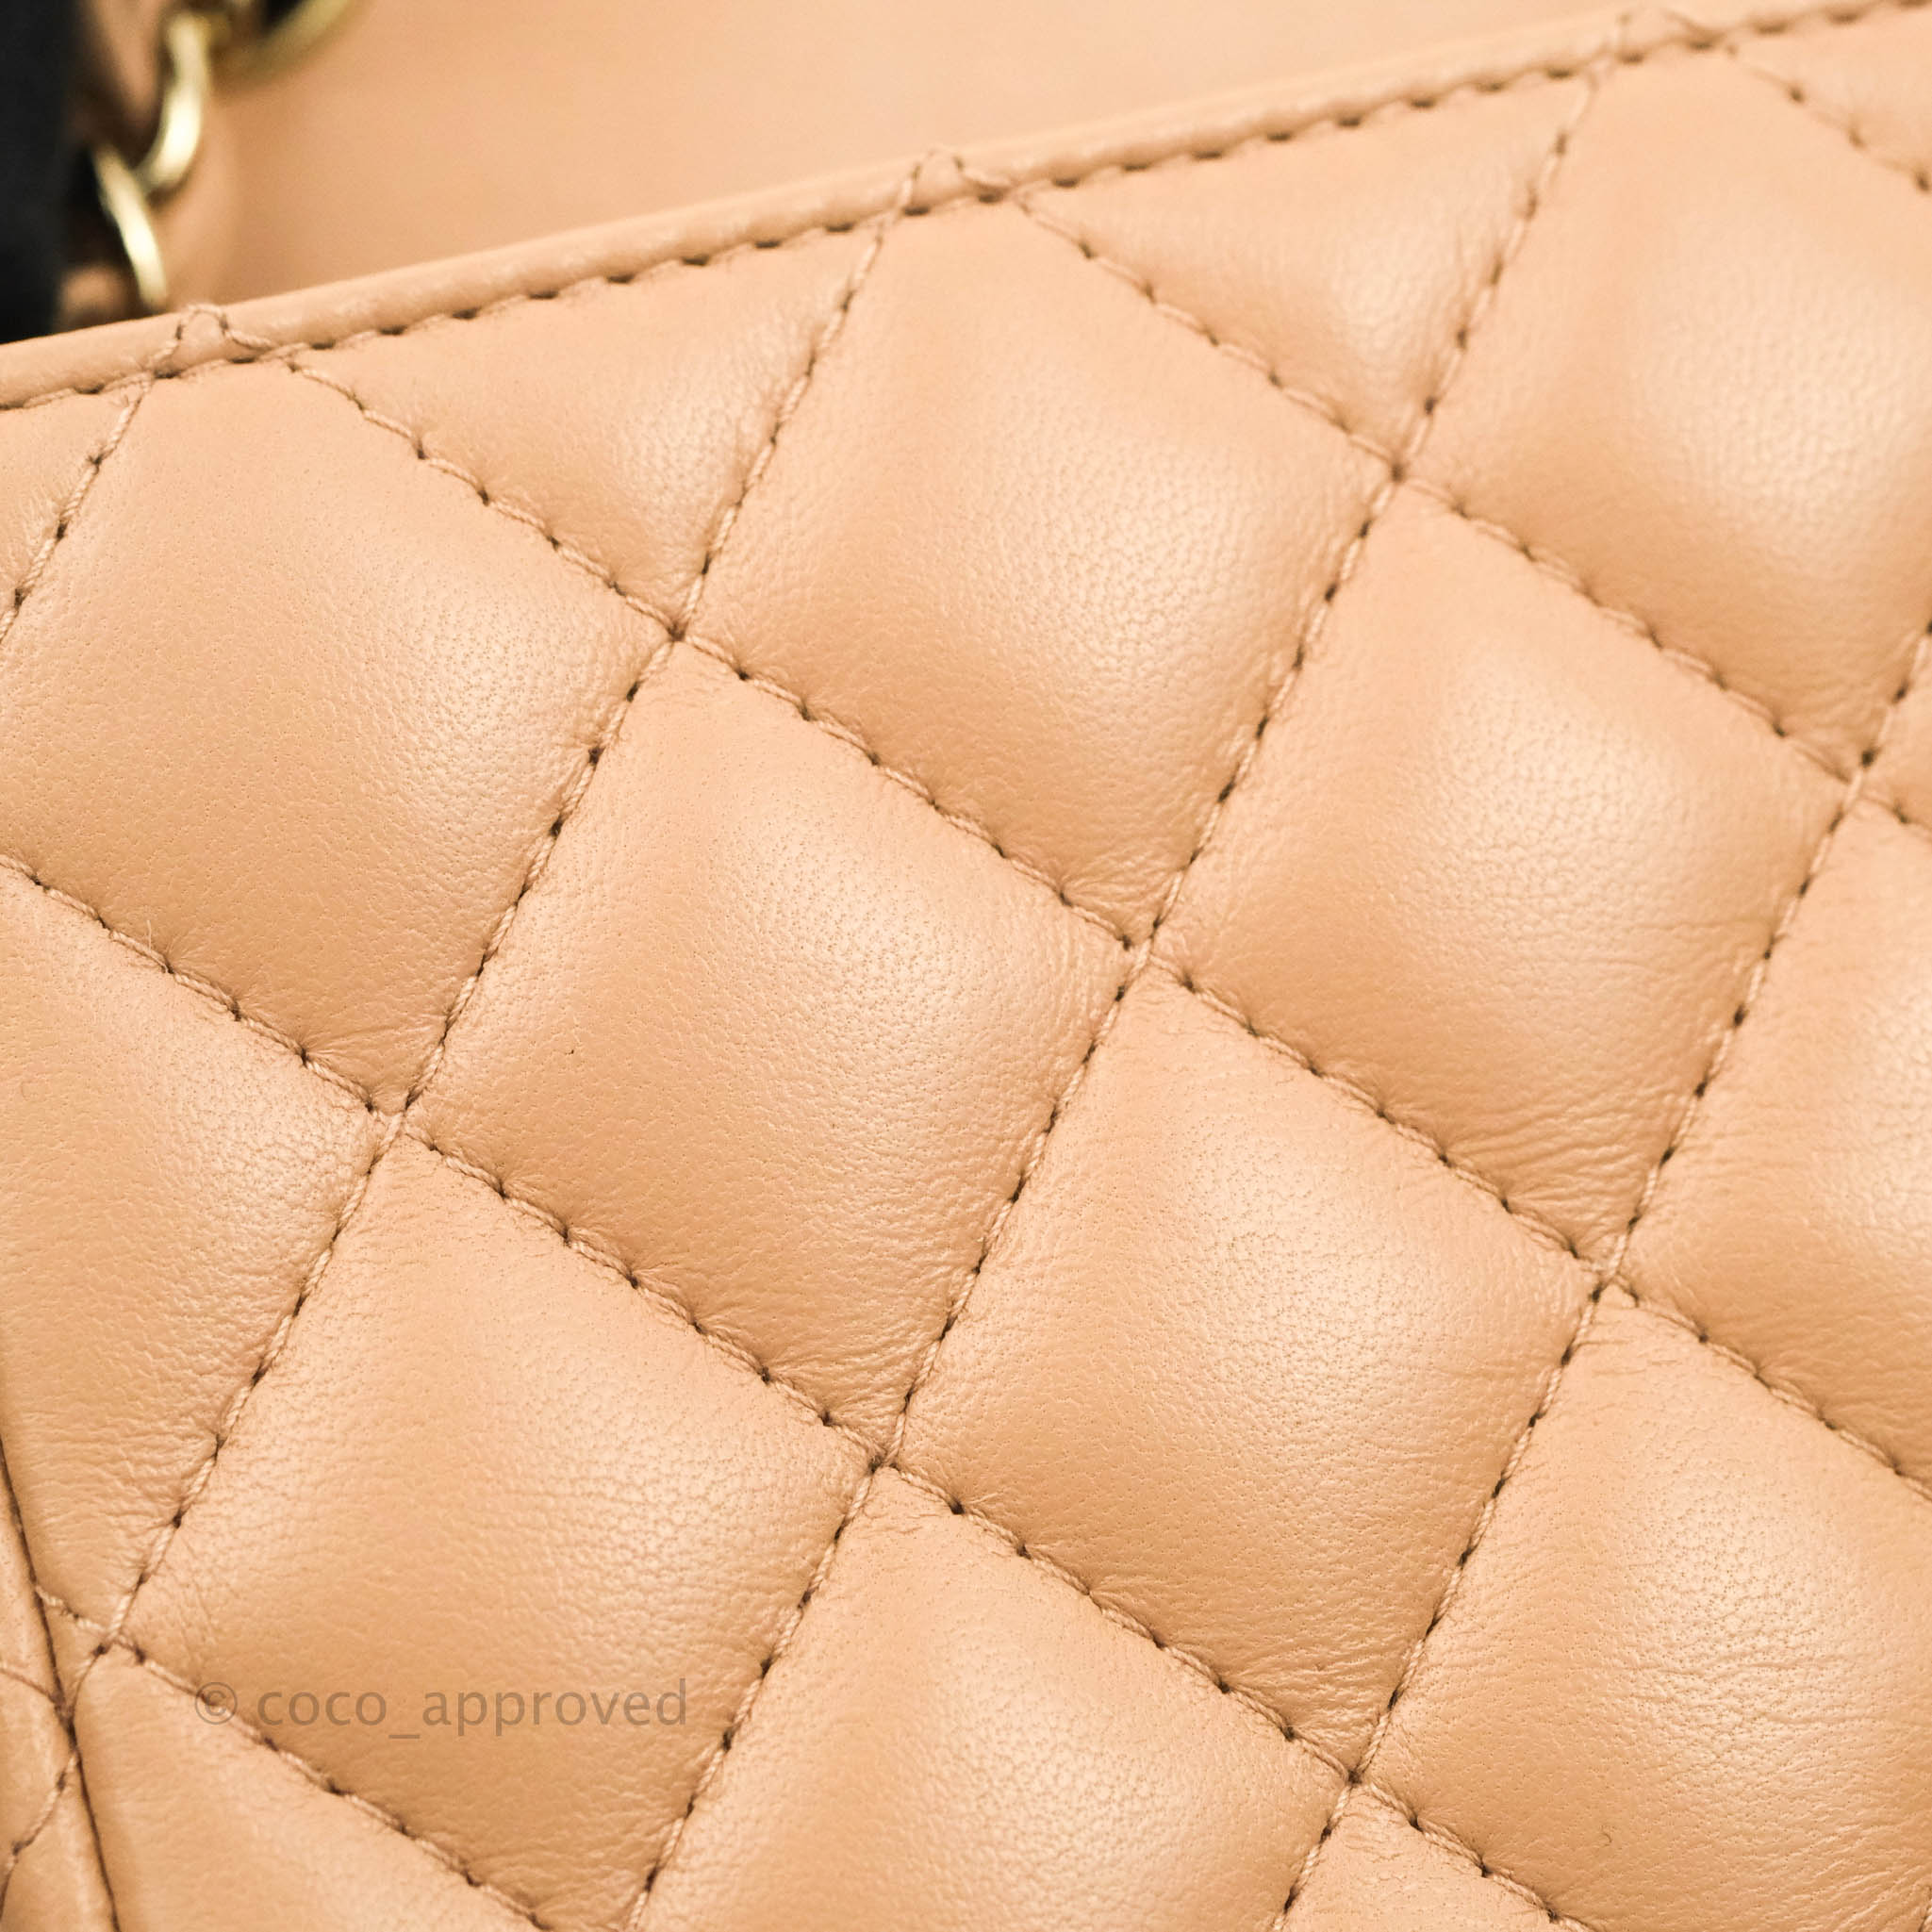 Chanel Quilted Mini Rectangular Flap Dark Beige Lambskin Gold Hardware –  Coco Approved Studio